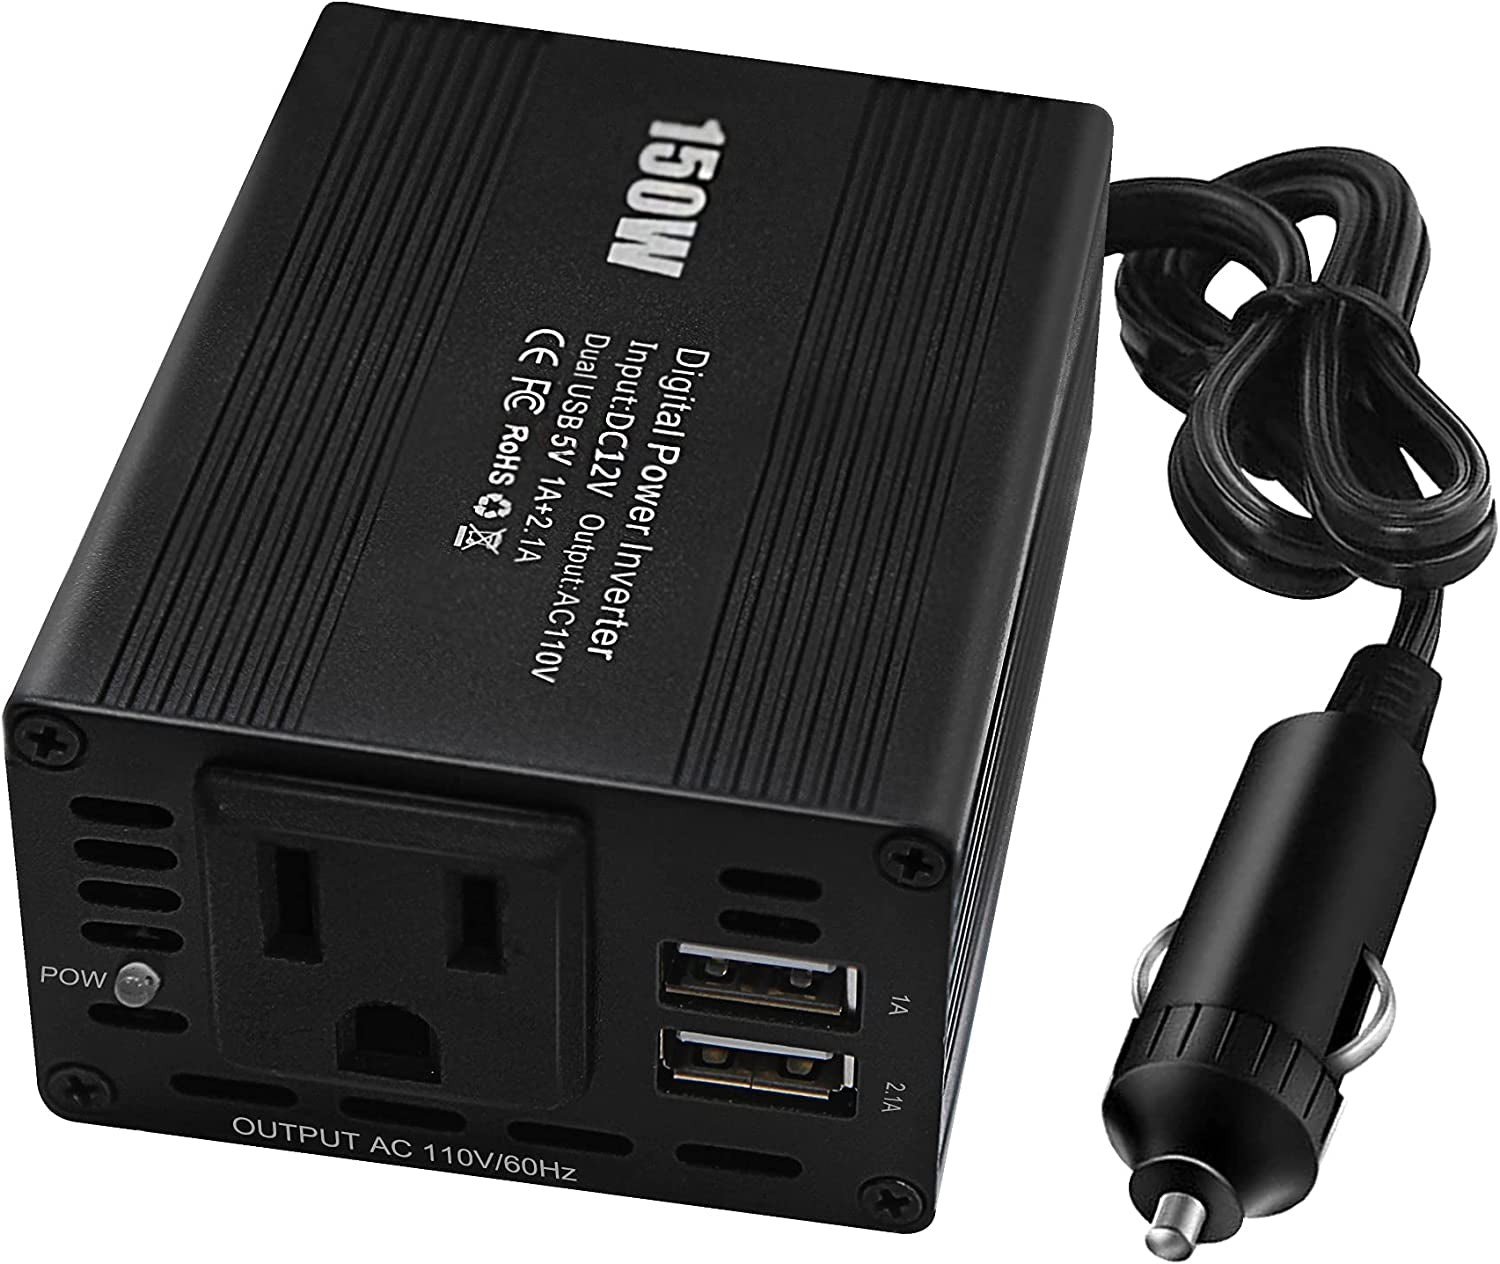 Homdec 150W Power Inverter, Car Plug Adapter Outlet, DC 12V to 110V AC Converter with 3.1A Dual USB Ports, Car Charger Adapter for Laptop, Computer, Phone, iPad, Camera and More